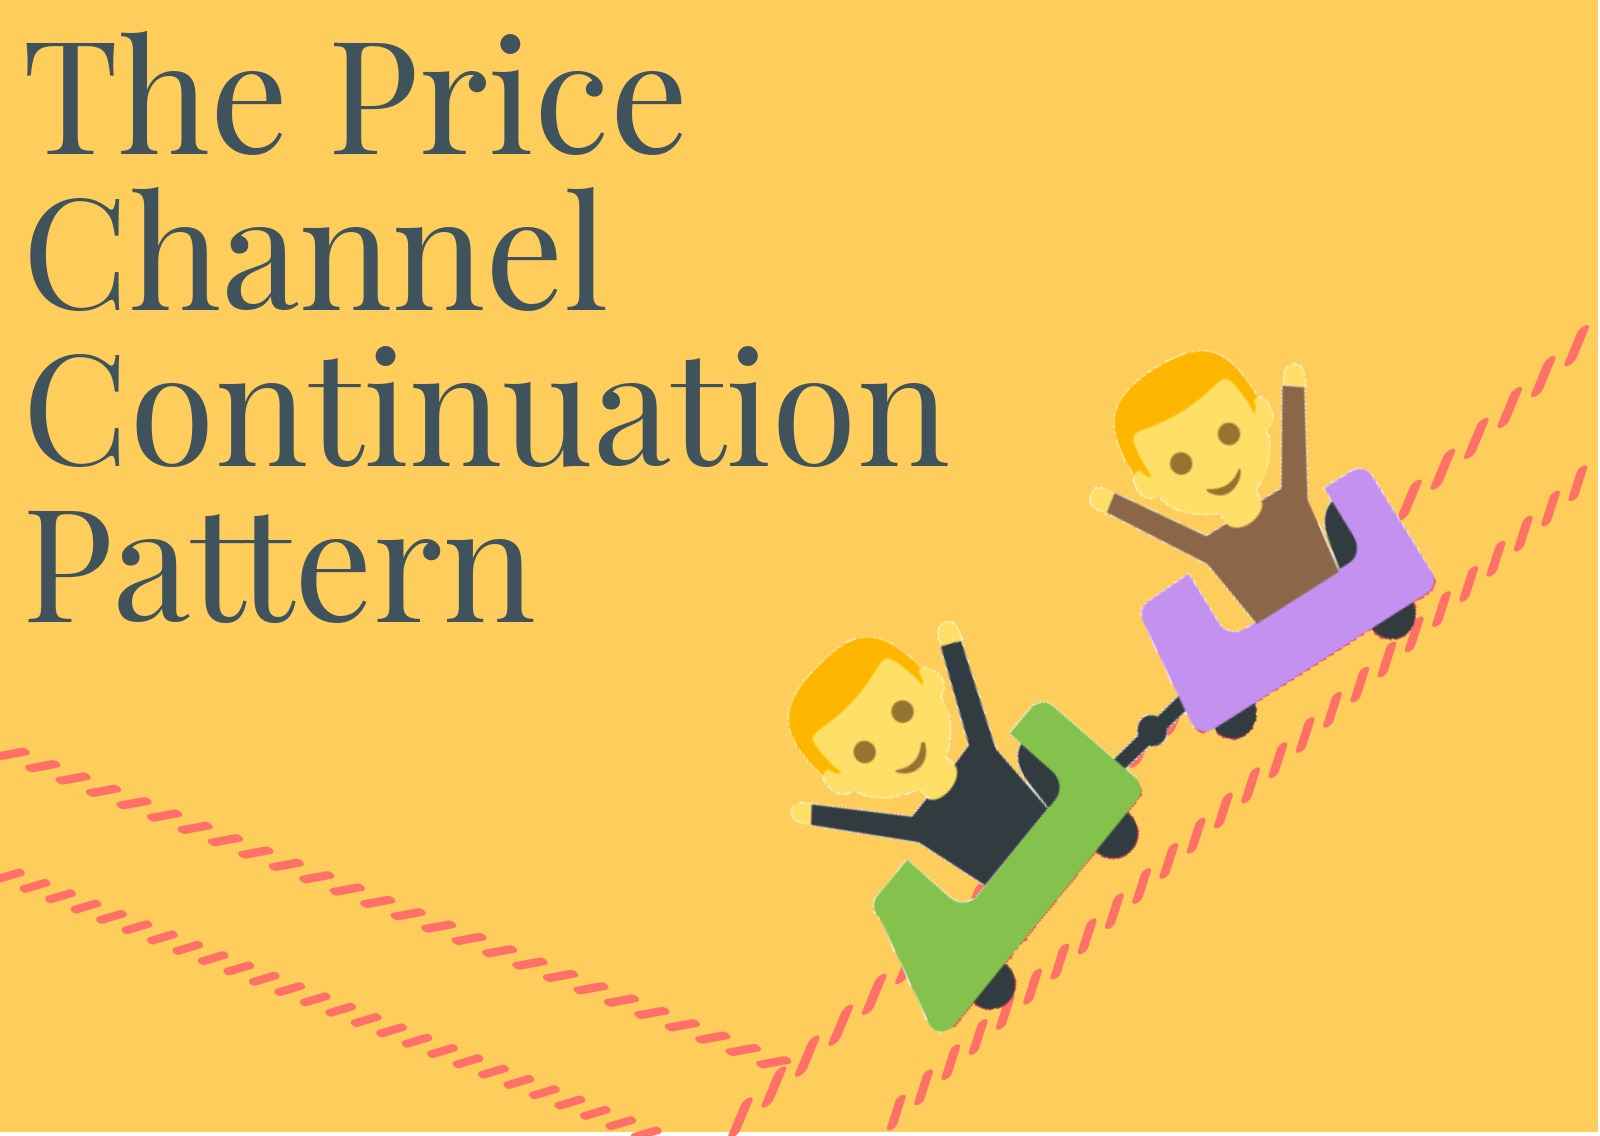 How to trade the Price Channel Continuation pattern